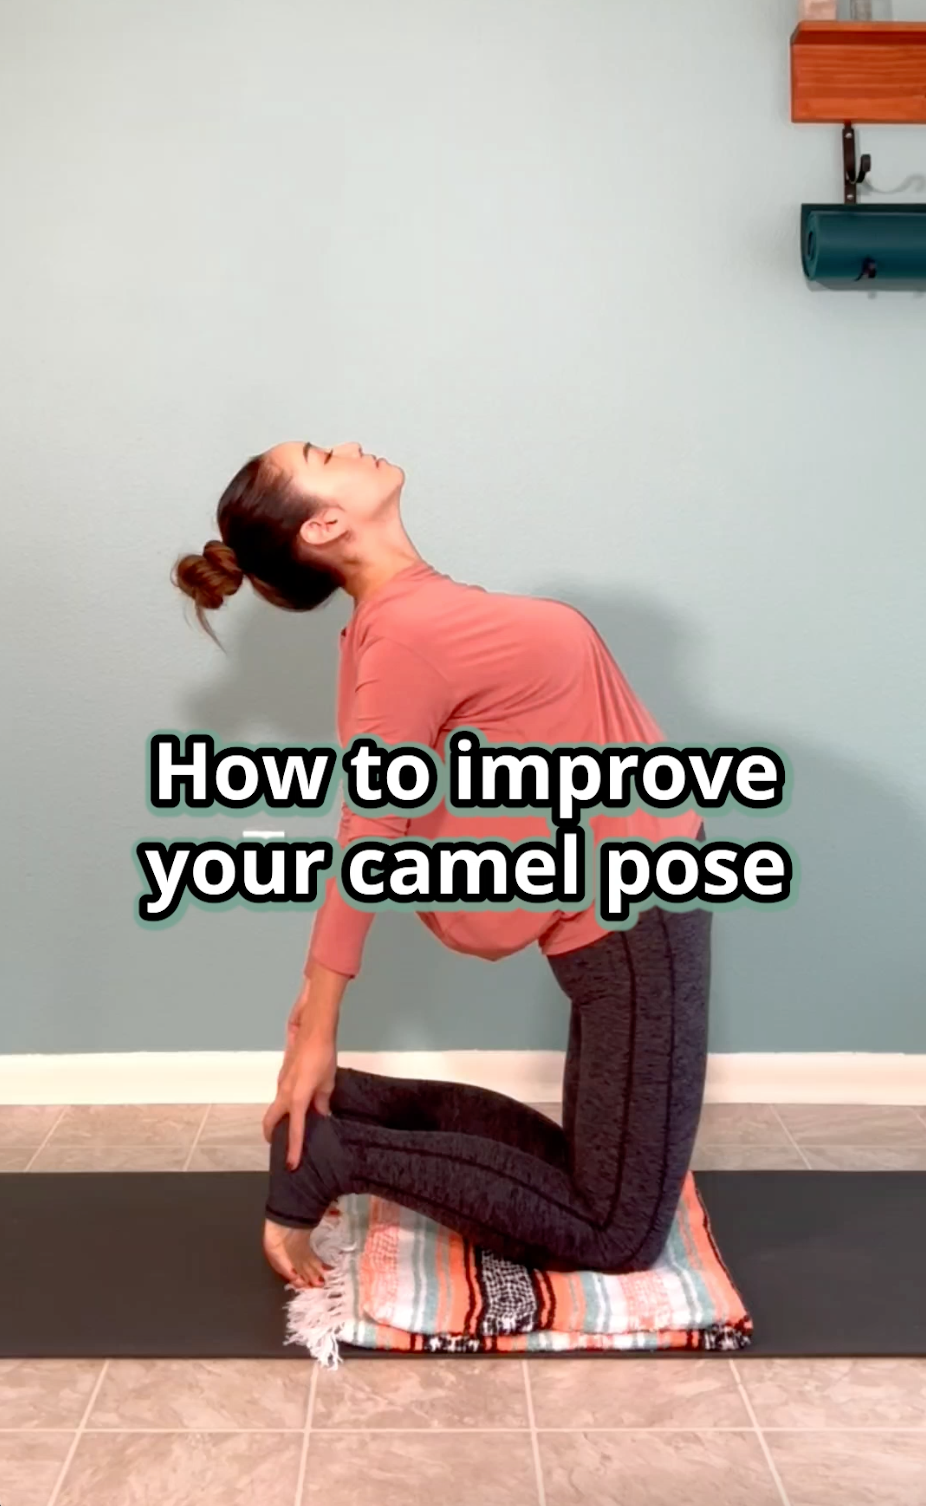 How to improve your camel pose